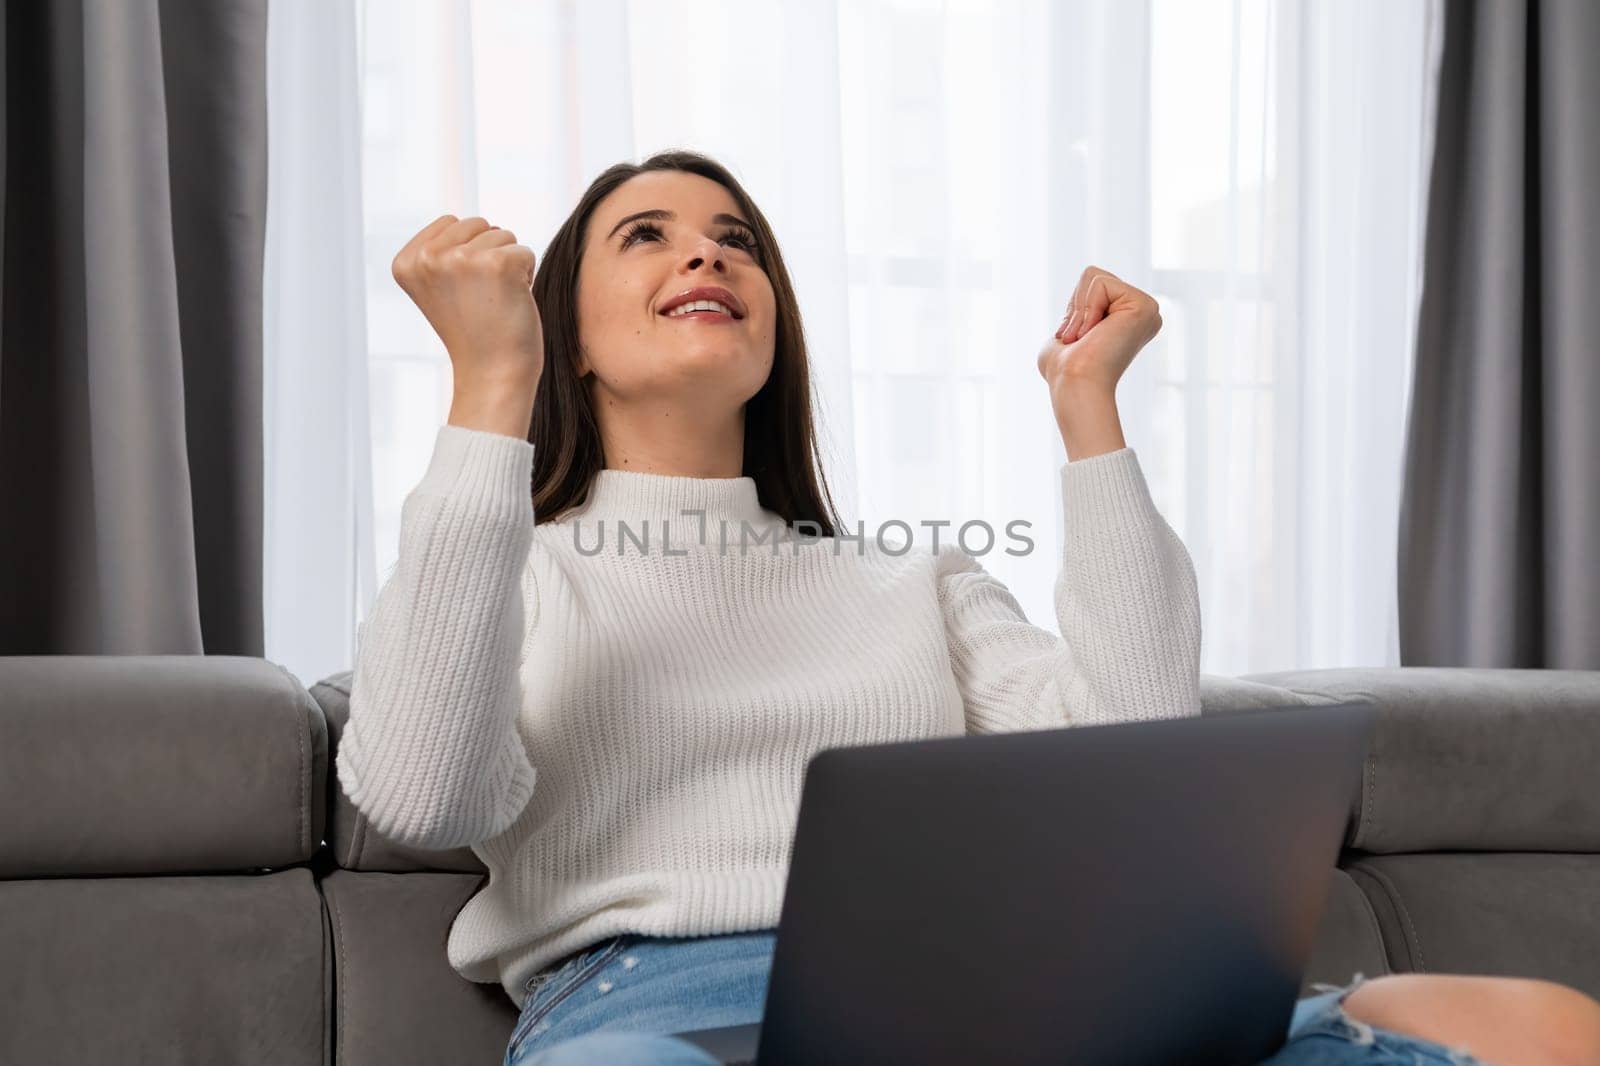 An excited young woman rejoices in internet victory holding a laptop on her lap in a cozy living room.